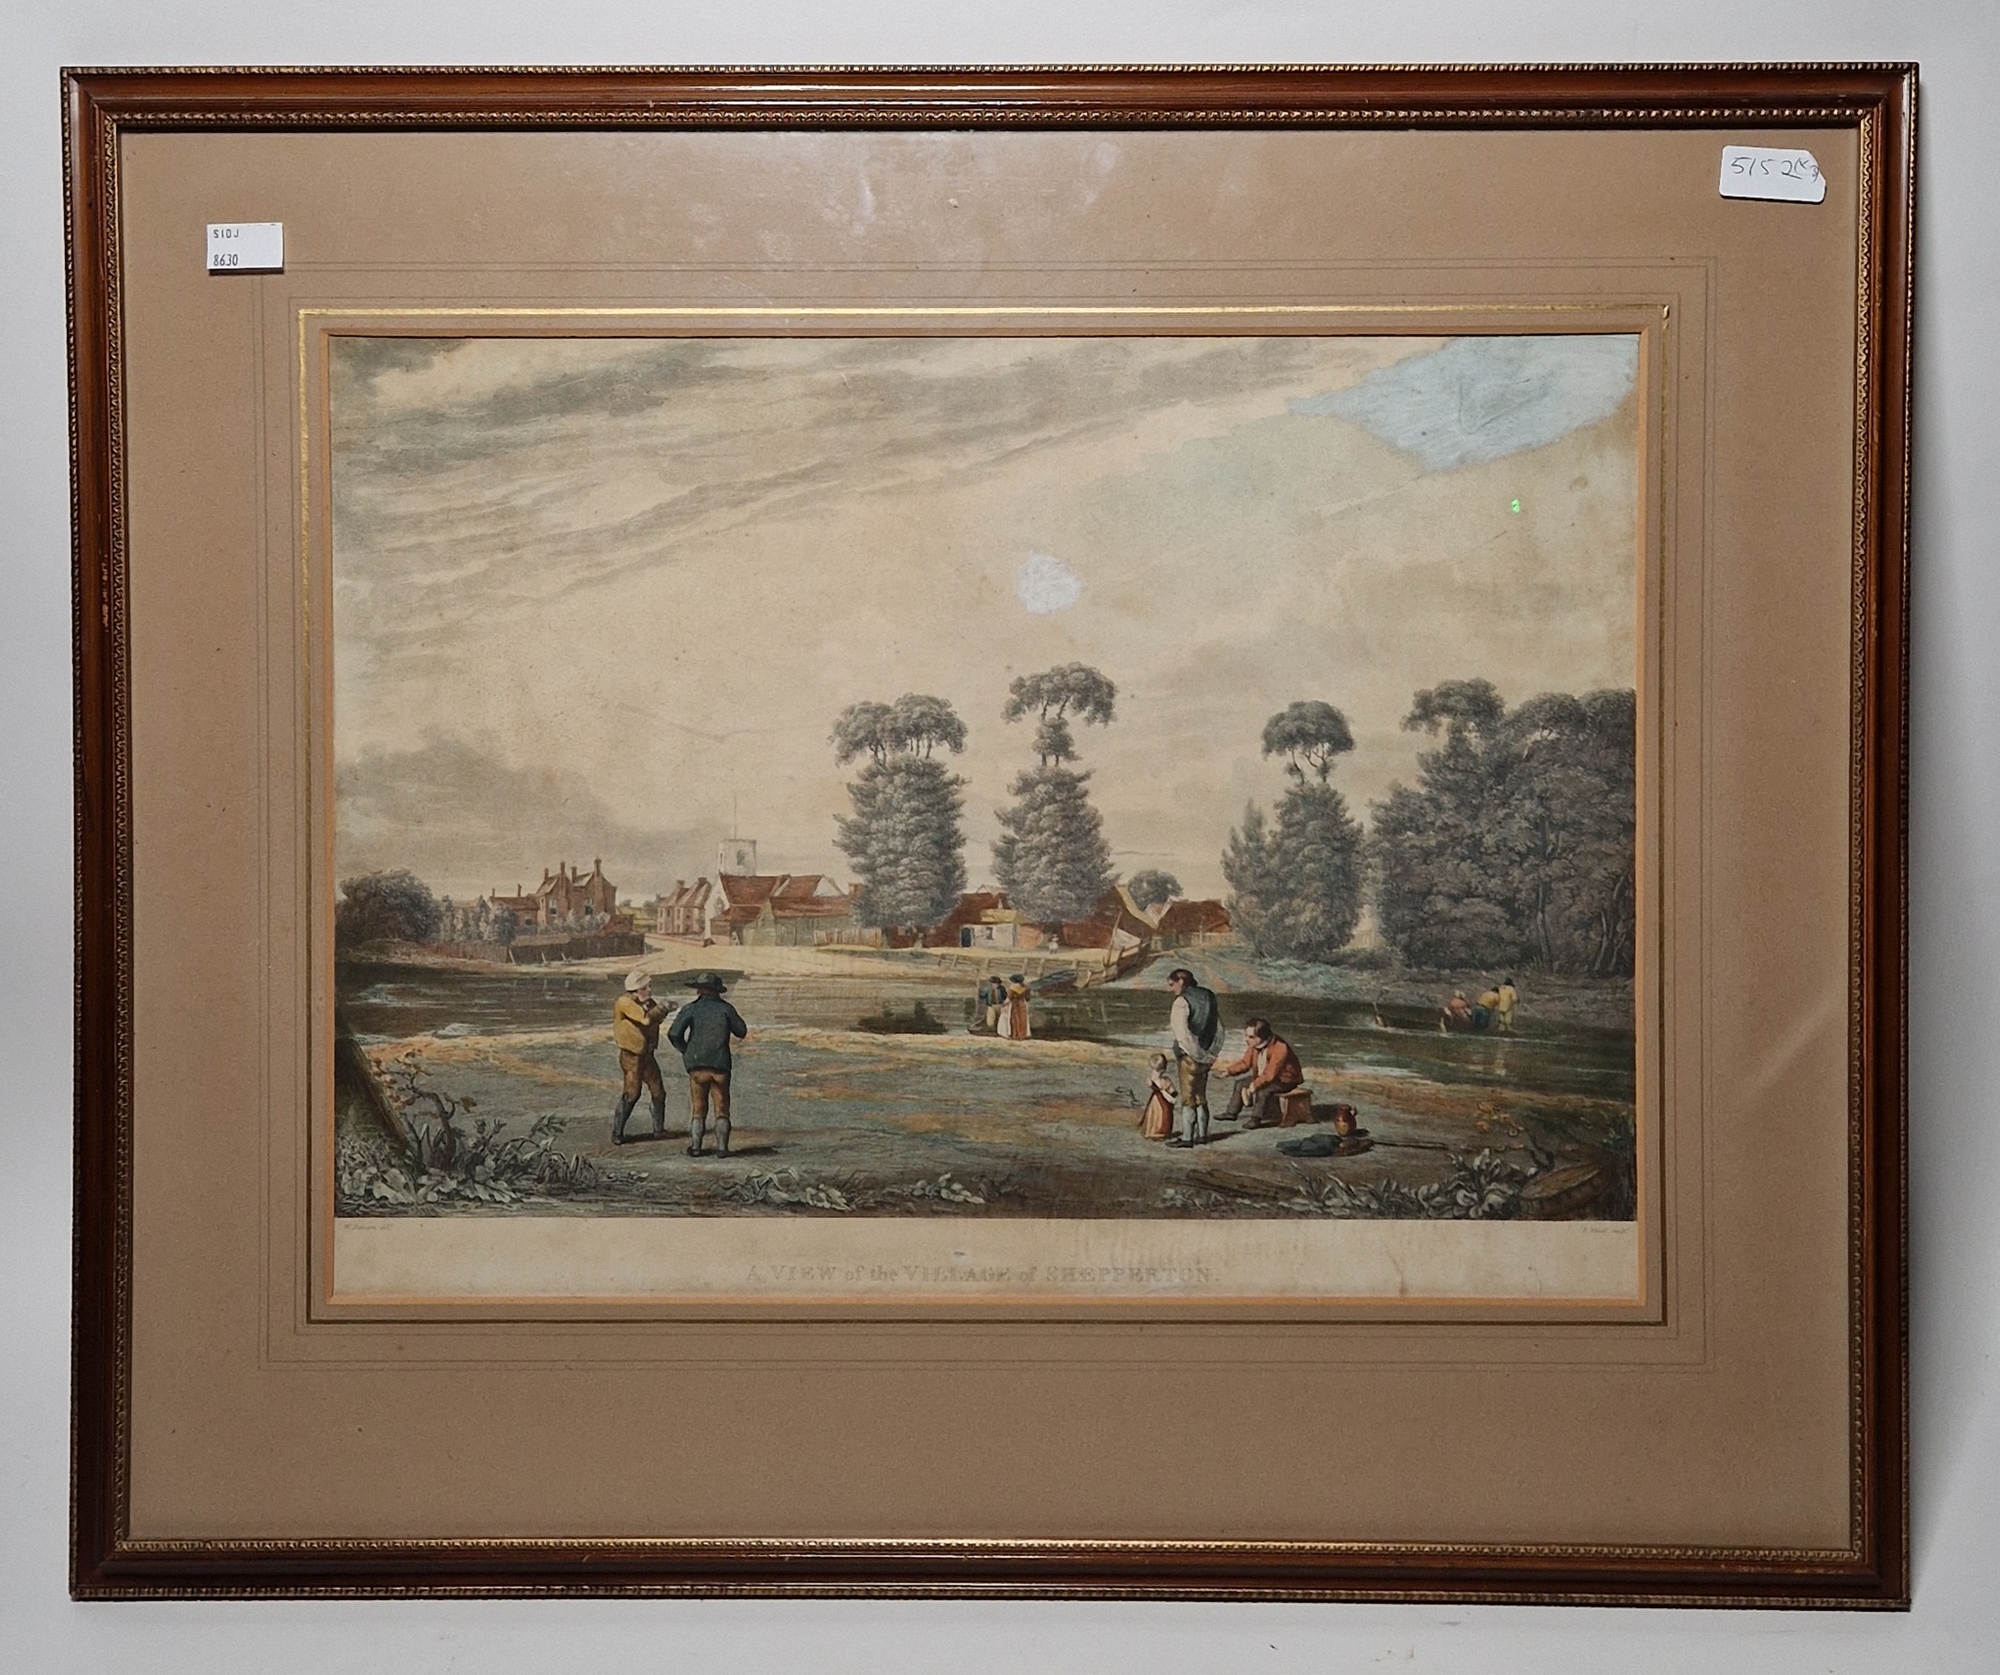 J Boydell Handcoloured engraving  "View of Shepperton", depicting horses and figures by the river, - Image 3 of 4